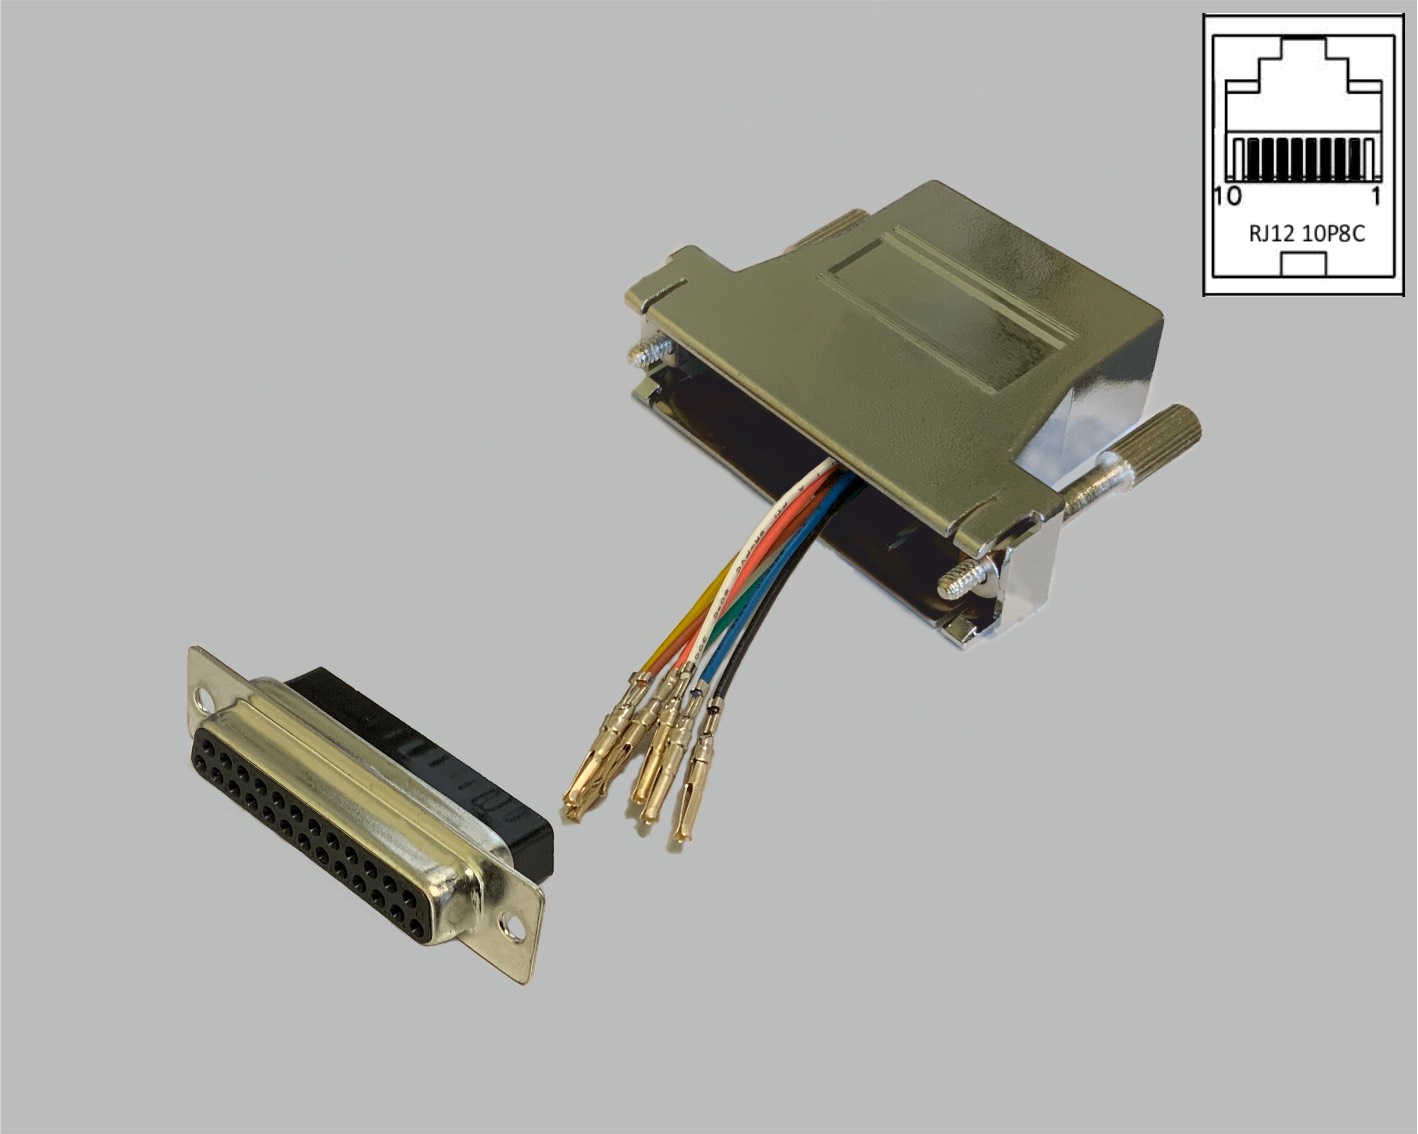 D-Sub/RJ adapter, freely configurable, D-Sub female connector 25-pin to RJ45 (10P8C) female connector, metallised